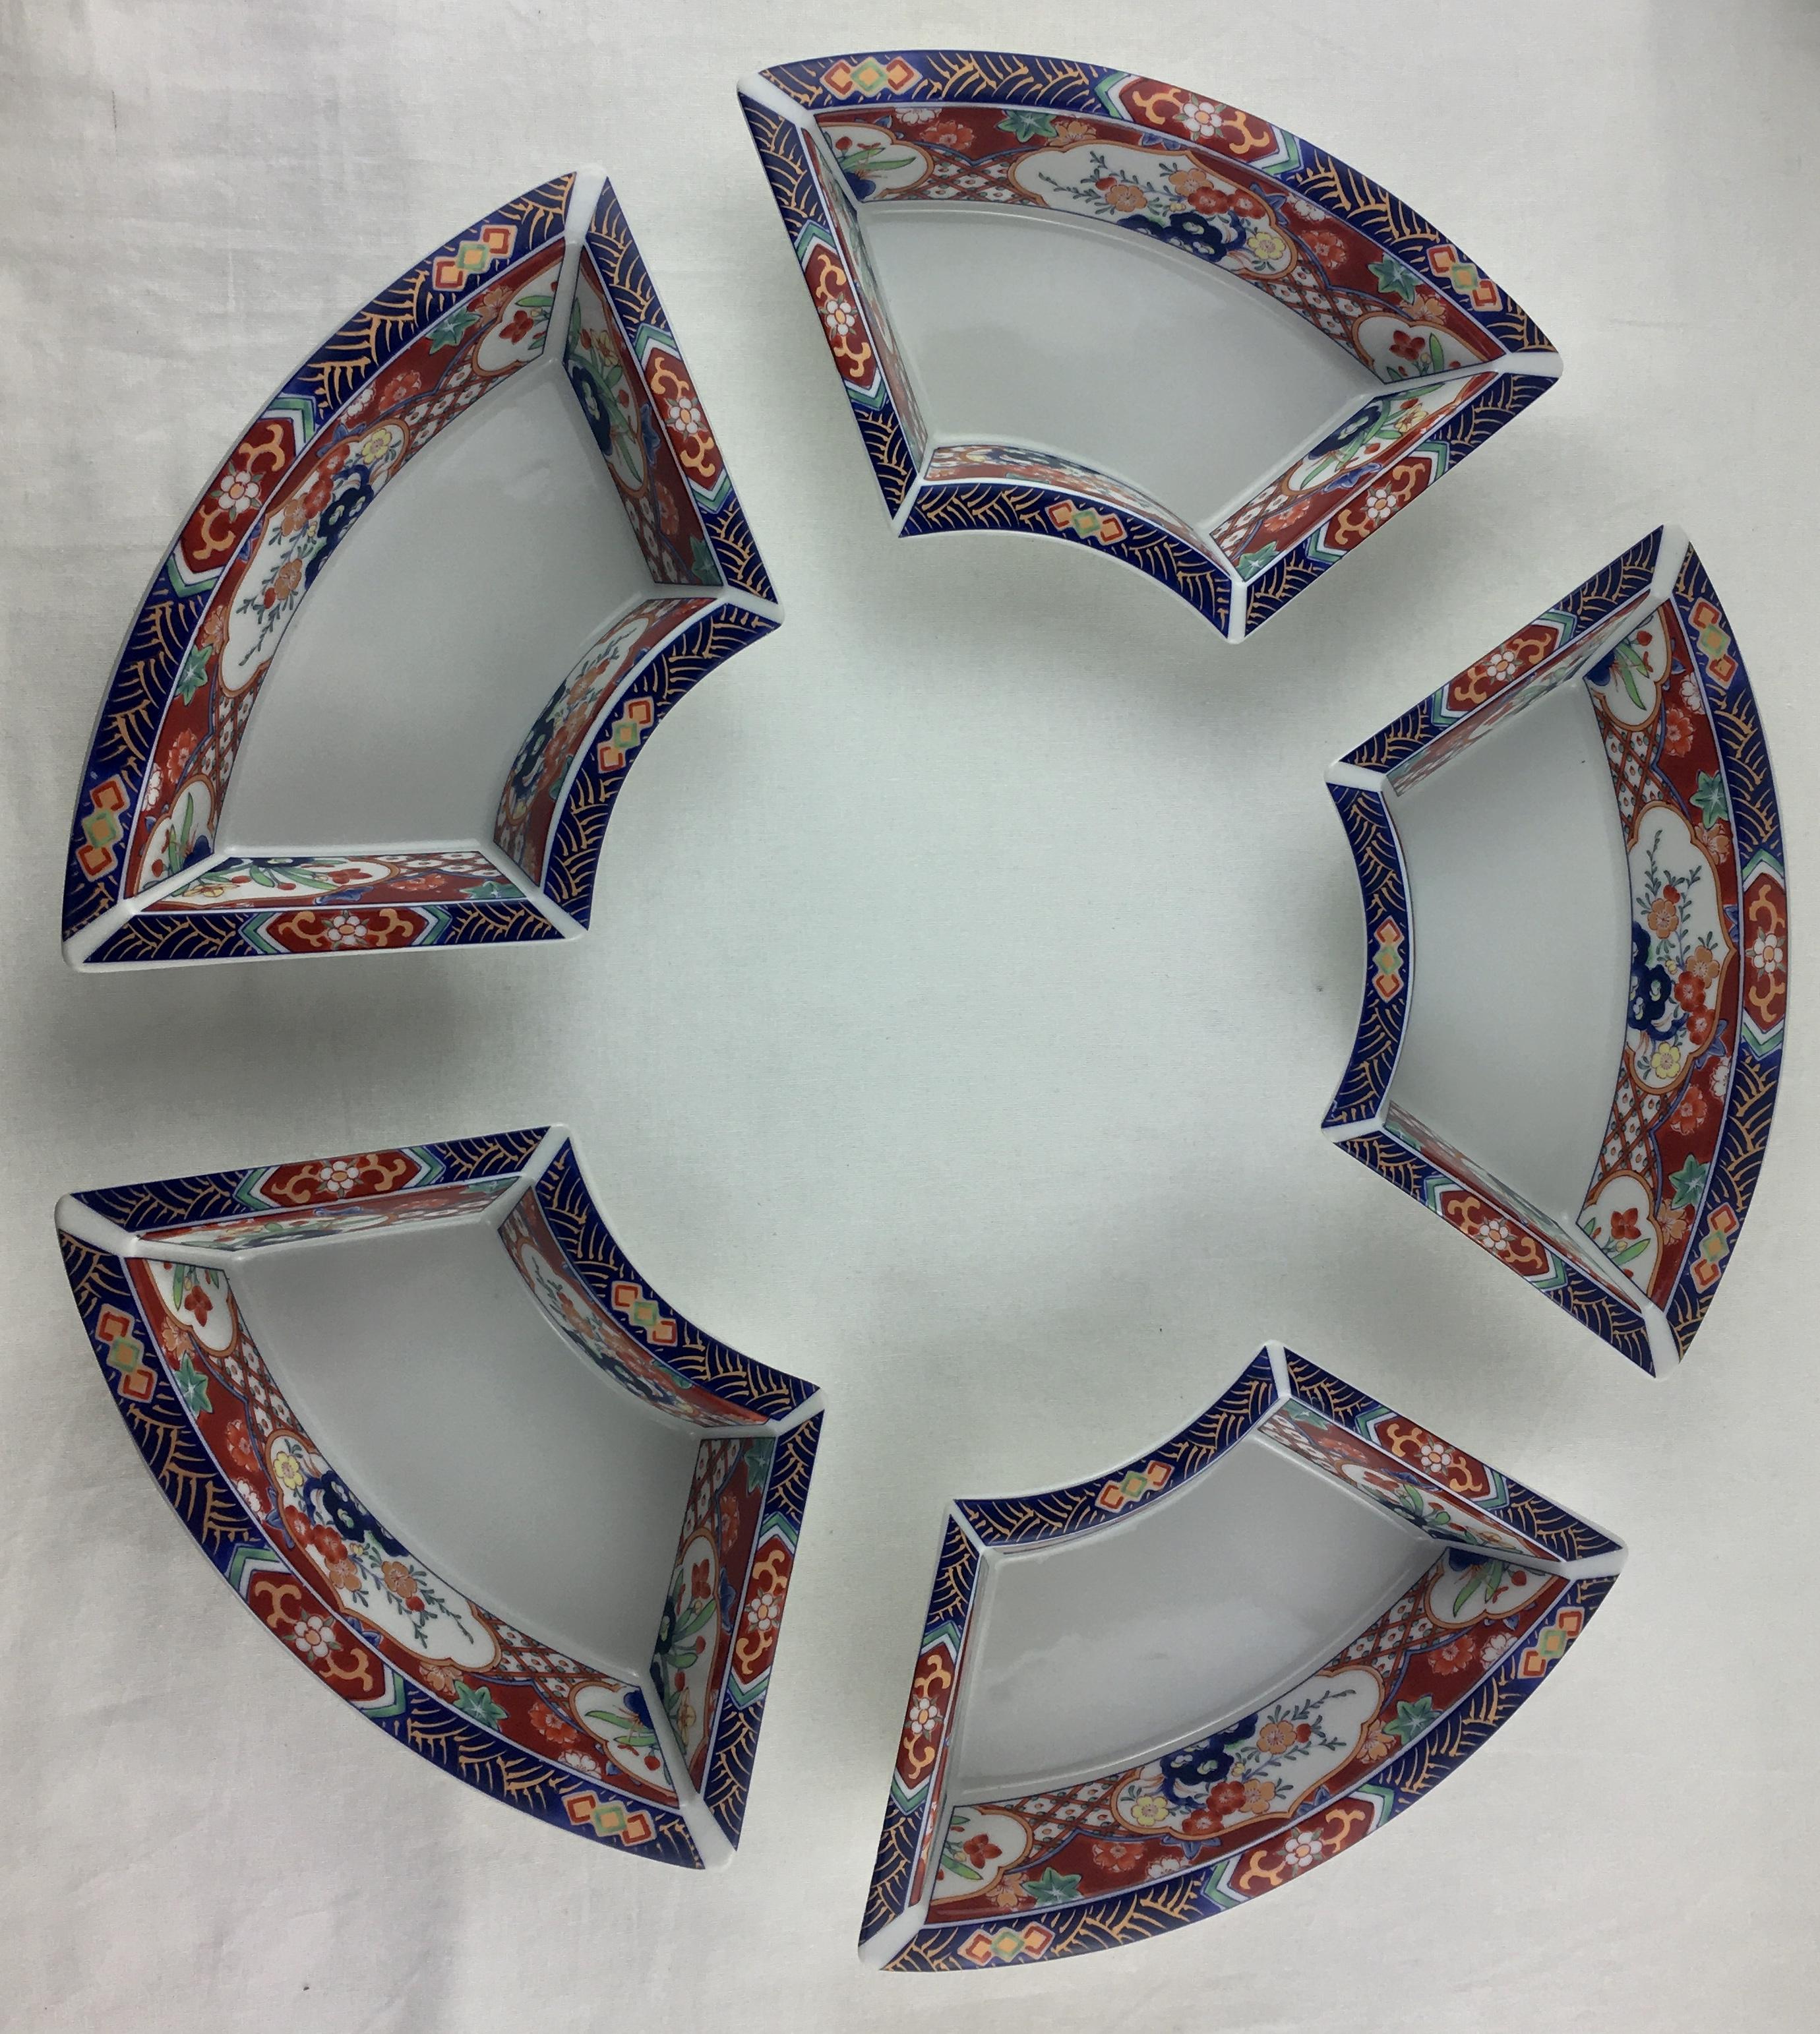 Imari hand painted service comprised of 5 dishes which can be used as an ensemble or separately, 20th century. 

These Japanese Imari porcelain dishes possibly for presenting cooked rice at a celebration, sauces, etc.. are. thickly painted and